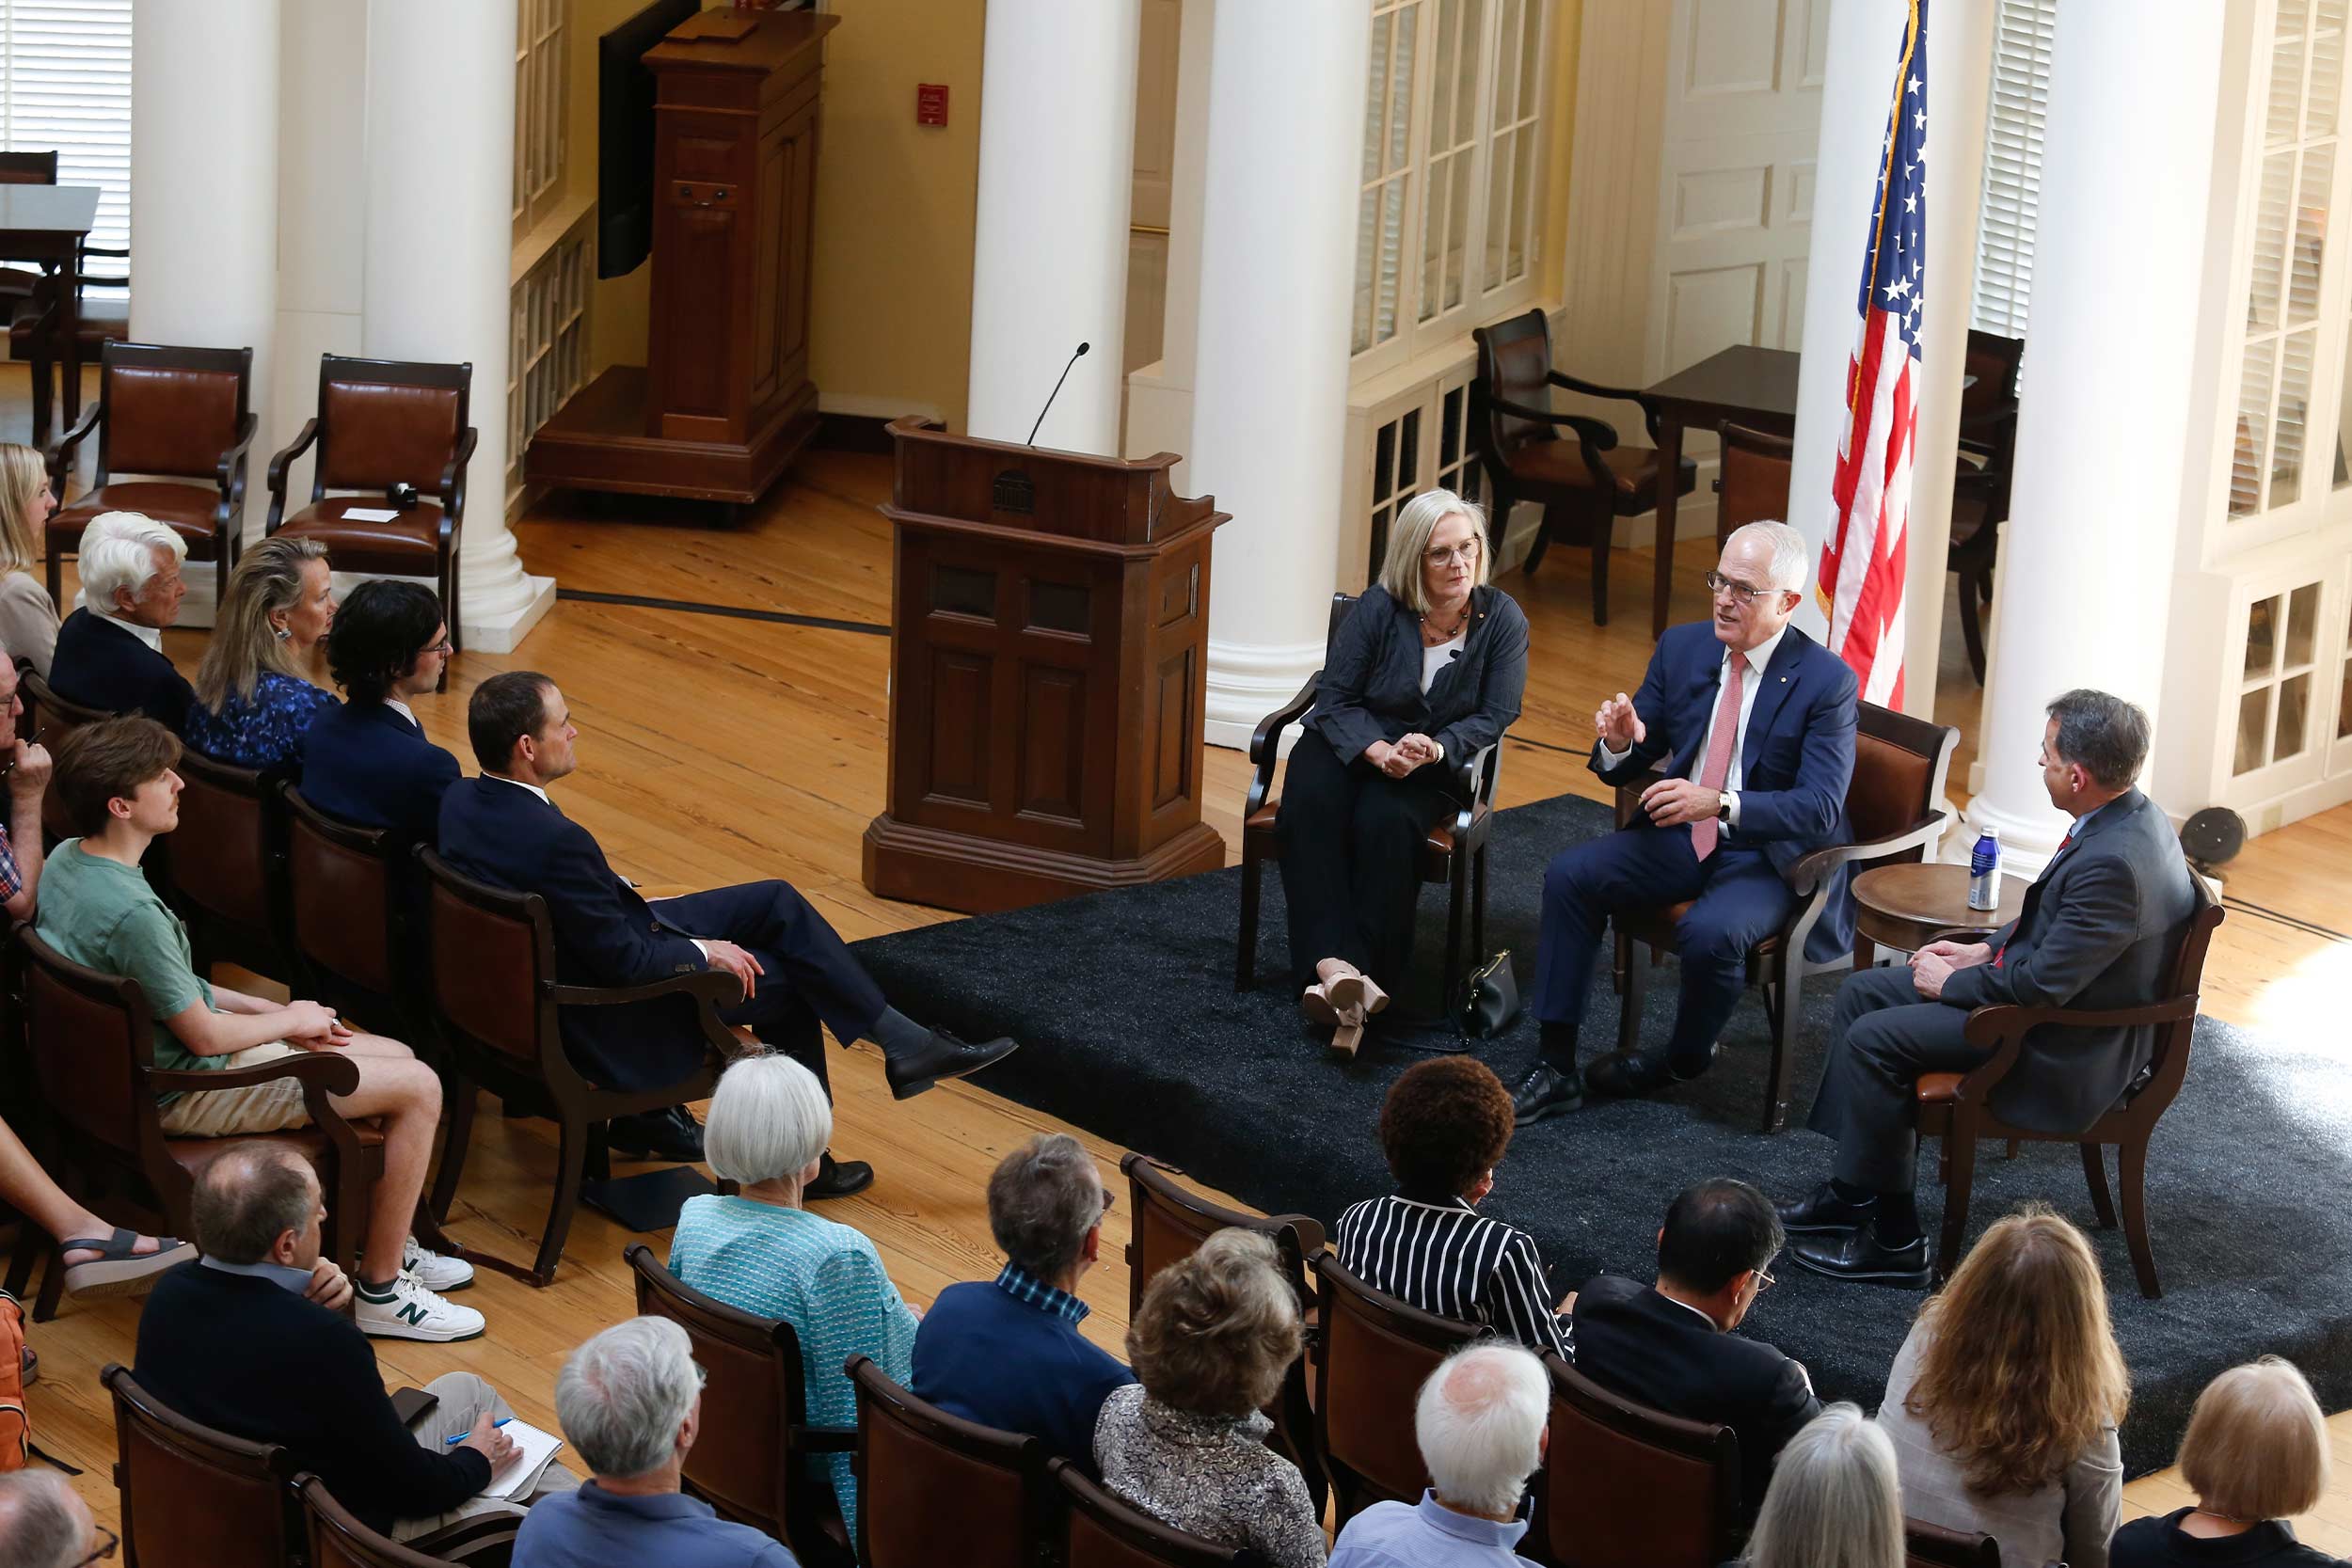 Lucy and Malcolm Turnbull joined Vice Provost Steve Mull for a discussion about the future of democracy and related topics in the Rotunda Dome Room. 